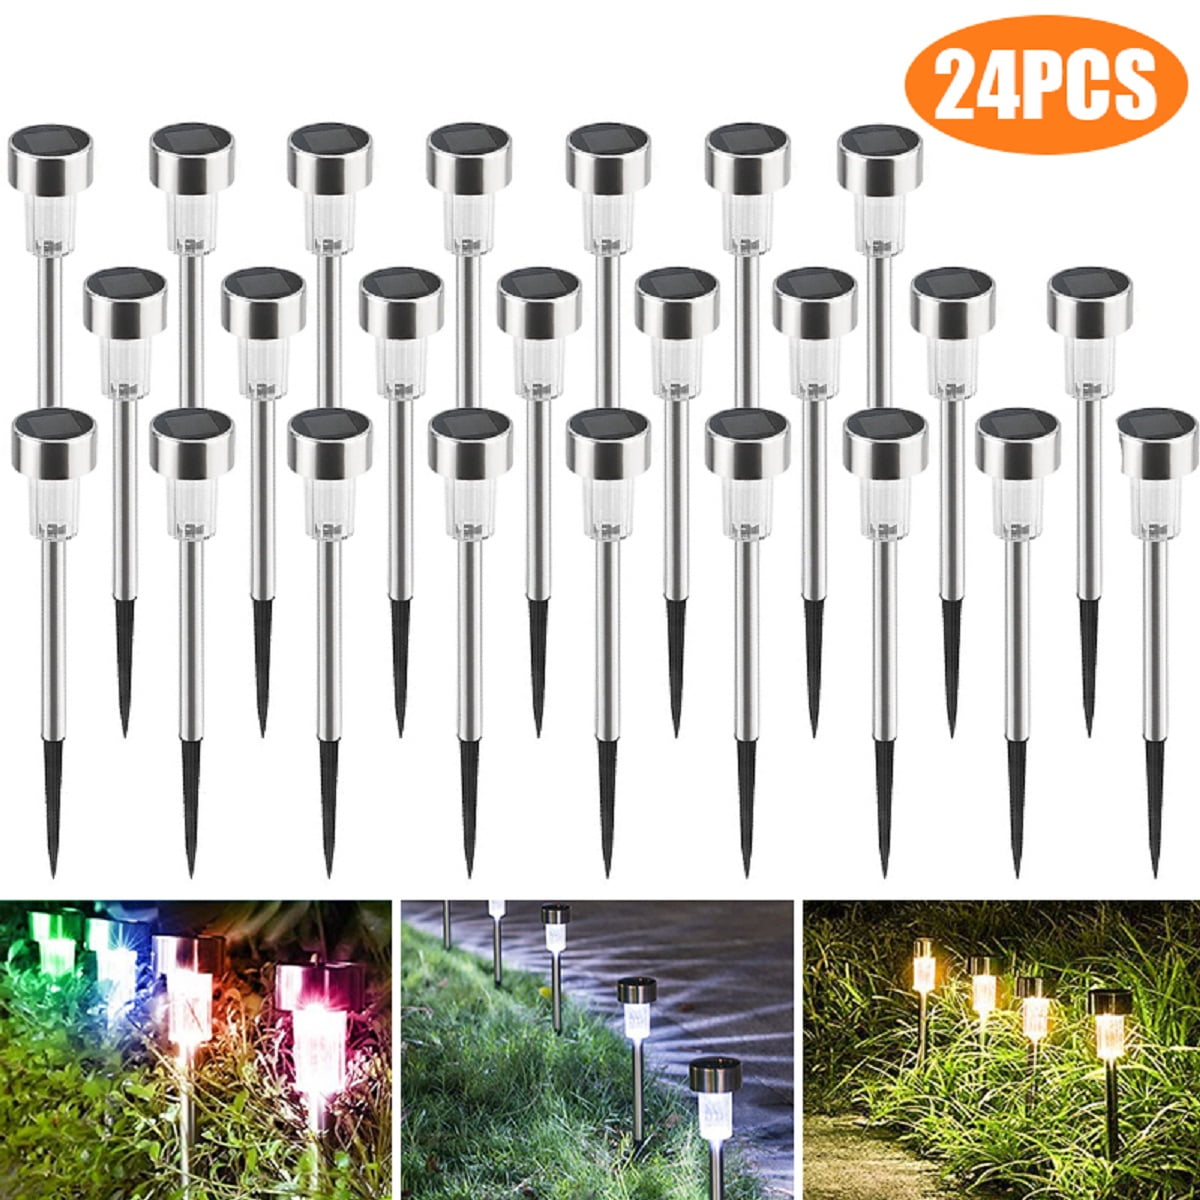 Stainless Steel Driveway Post Lights Solar Powered Garden Path Stake Lights 